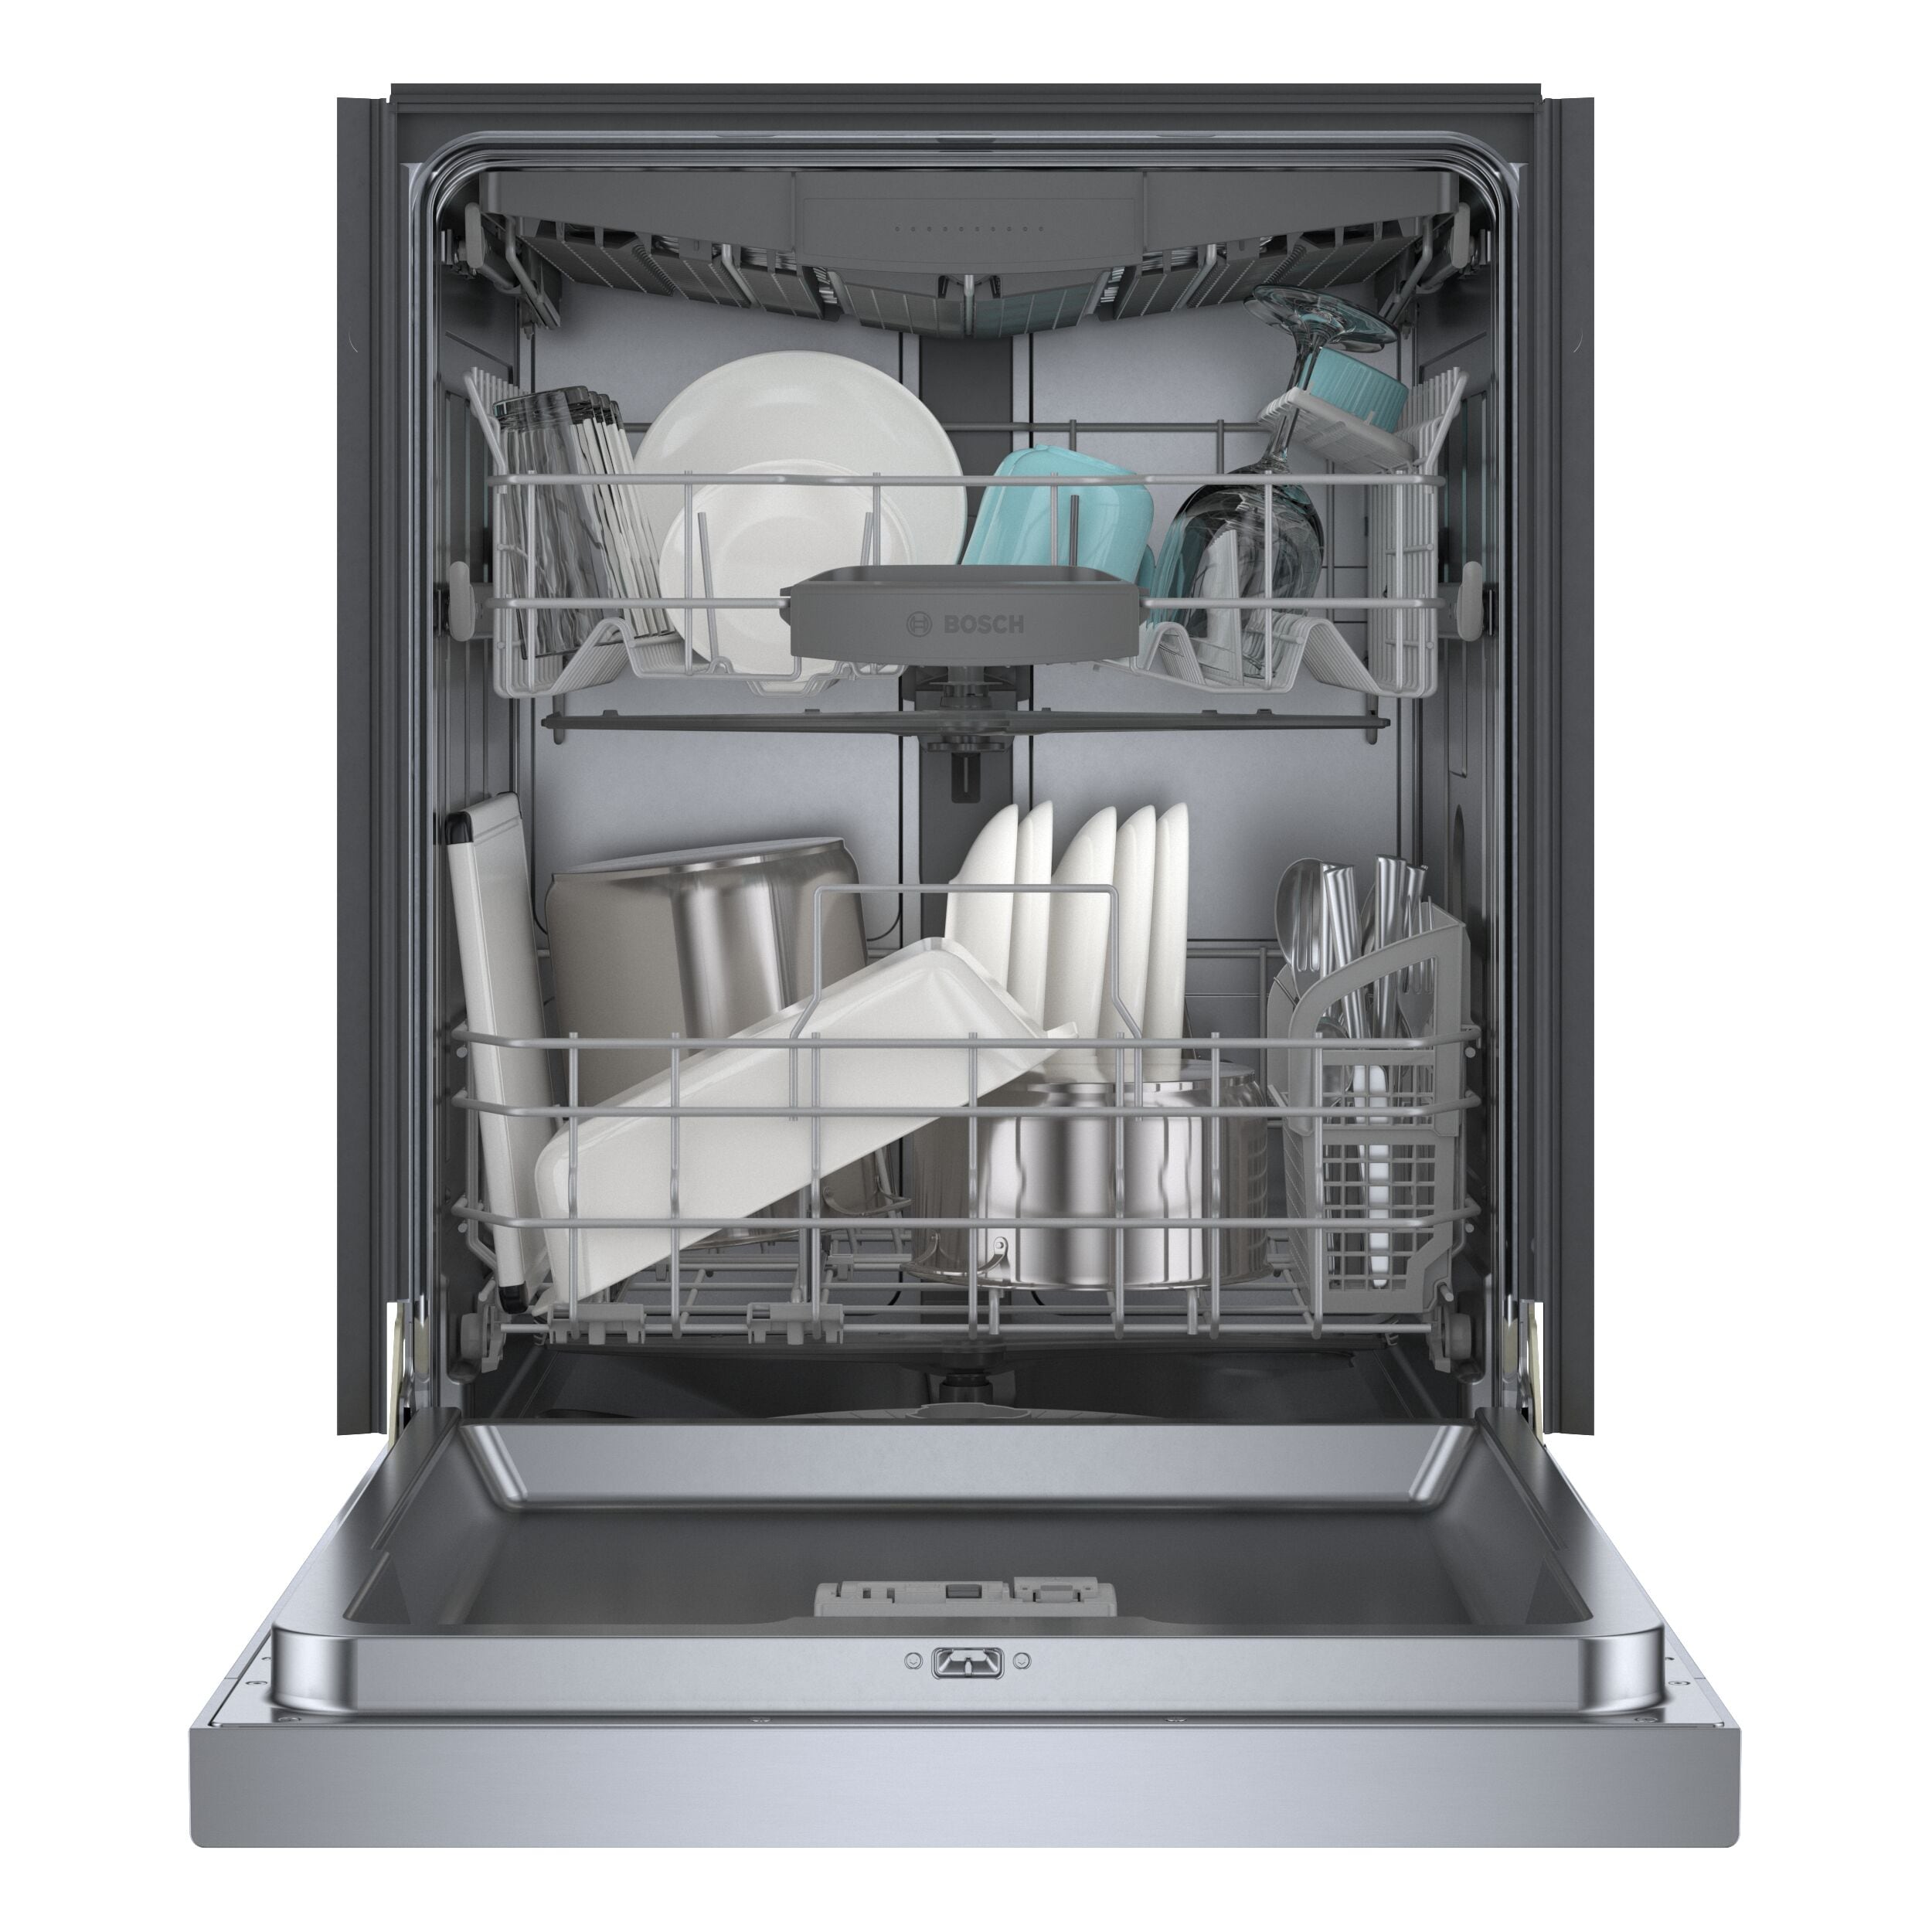 Bosch 300 Series Front Control 24-in Smart Built-In Dishwasher 